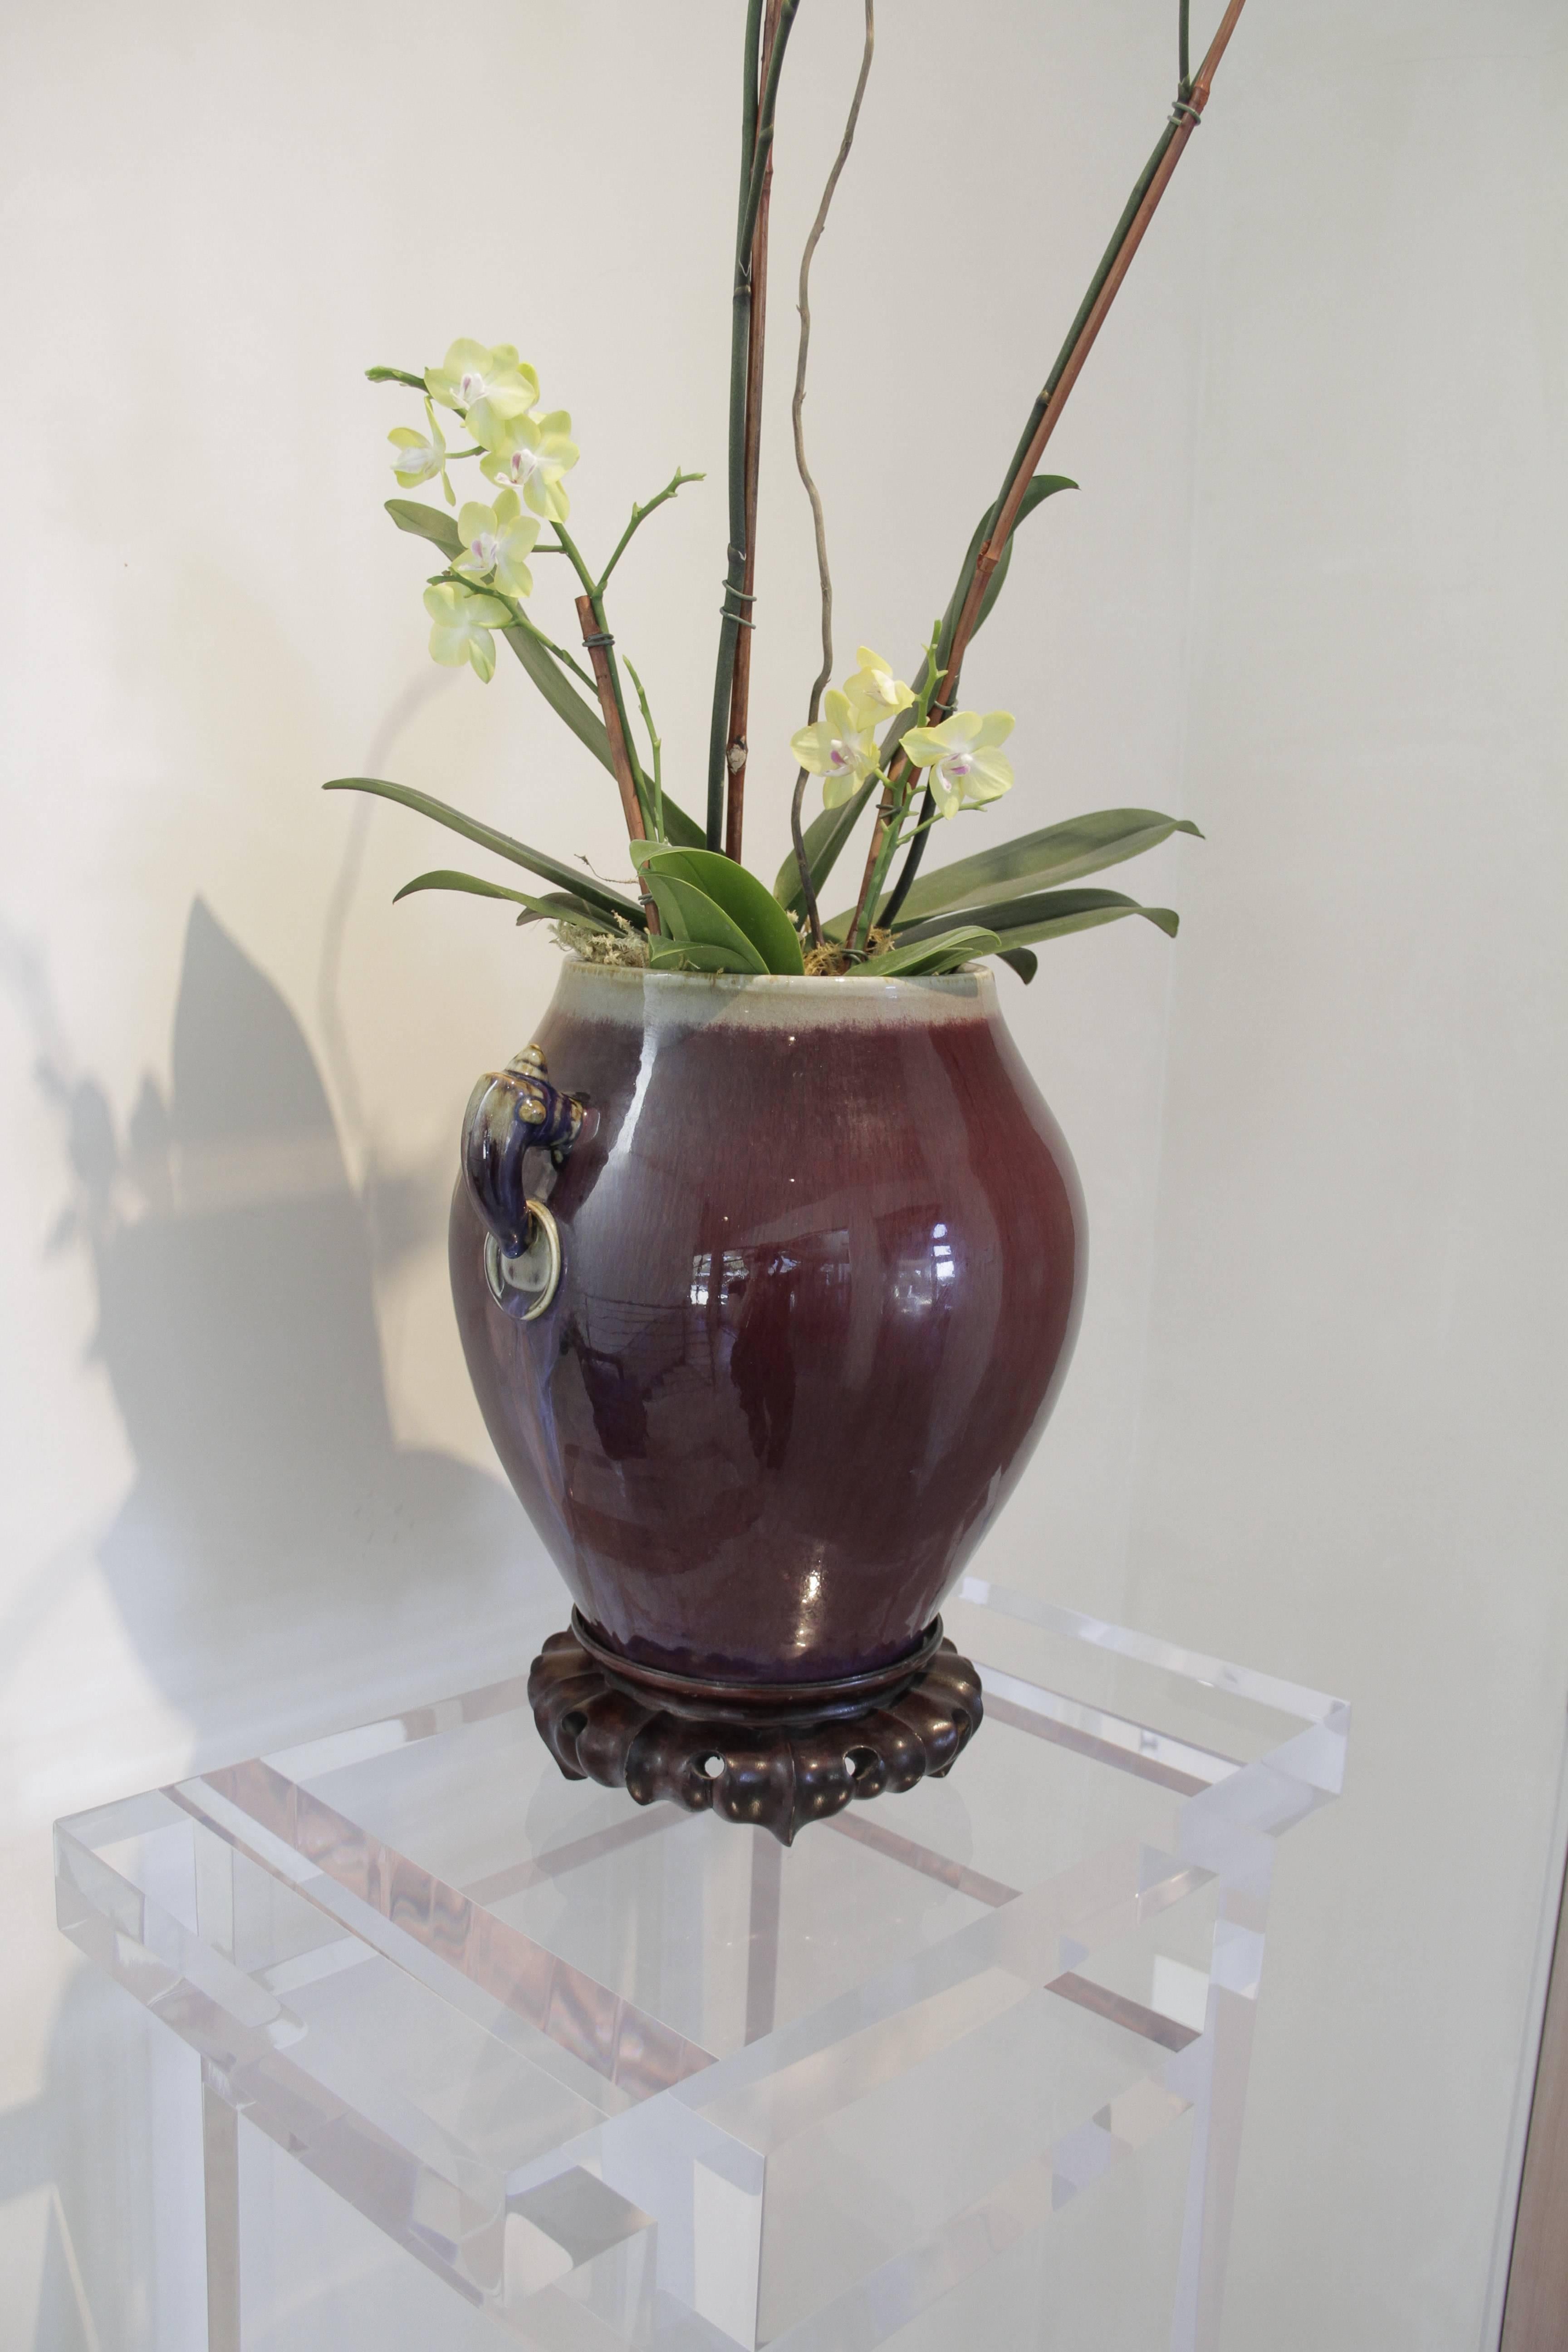 This vase from China dates back to circa 1875-1908 from the Ching dynasty, Kwang-Hsu period. It is an excellent example of the pottery technique and color called Oxblood. It comes with a wooden carved stand. 

As designers we plant these vases with